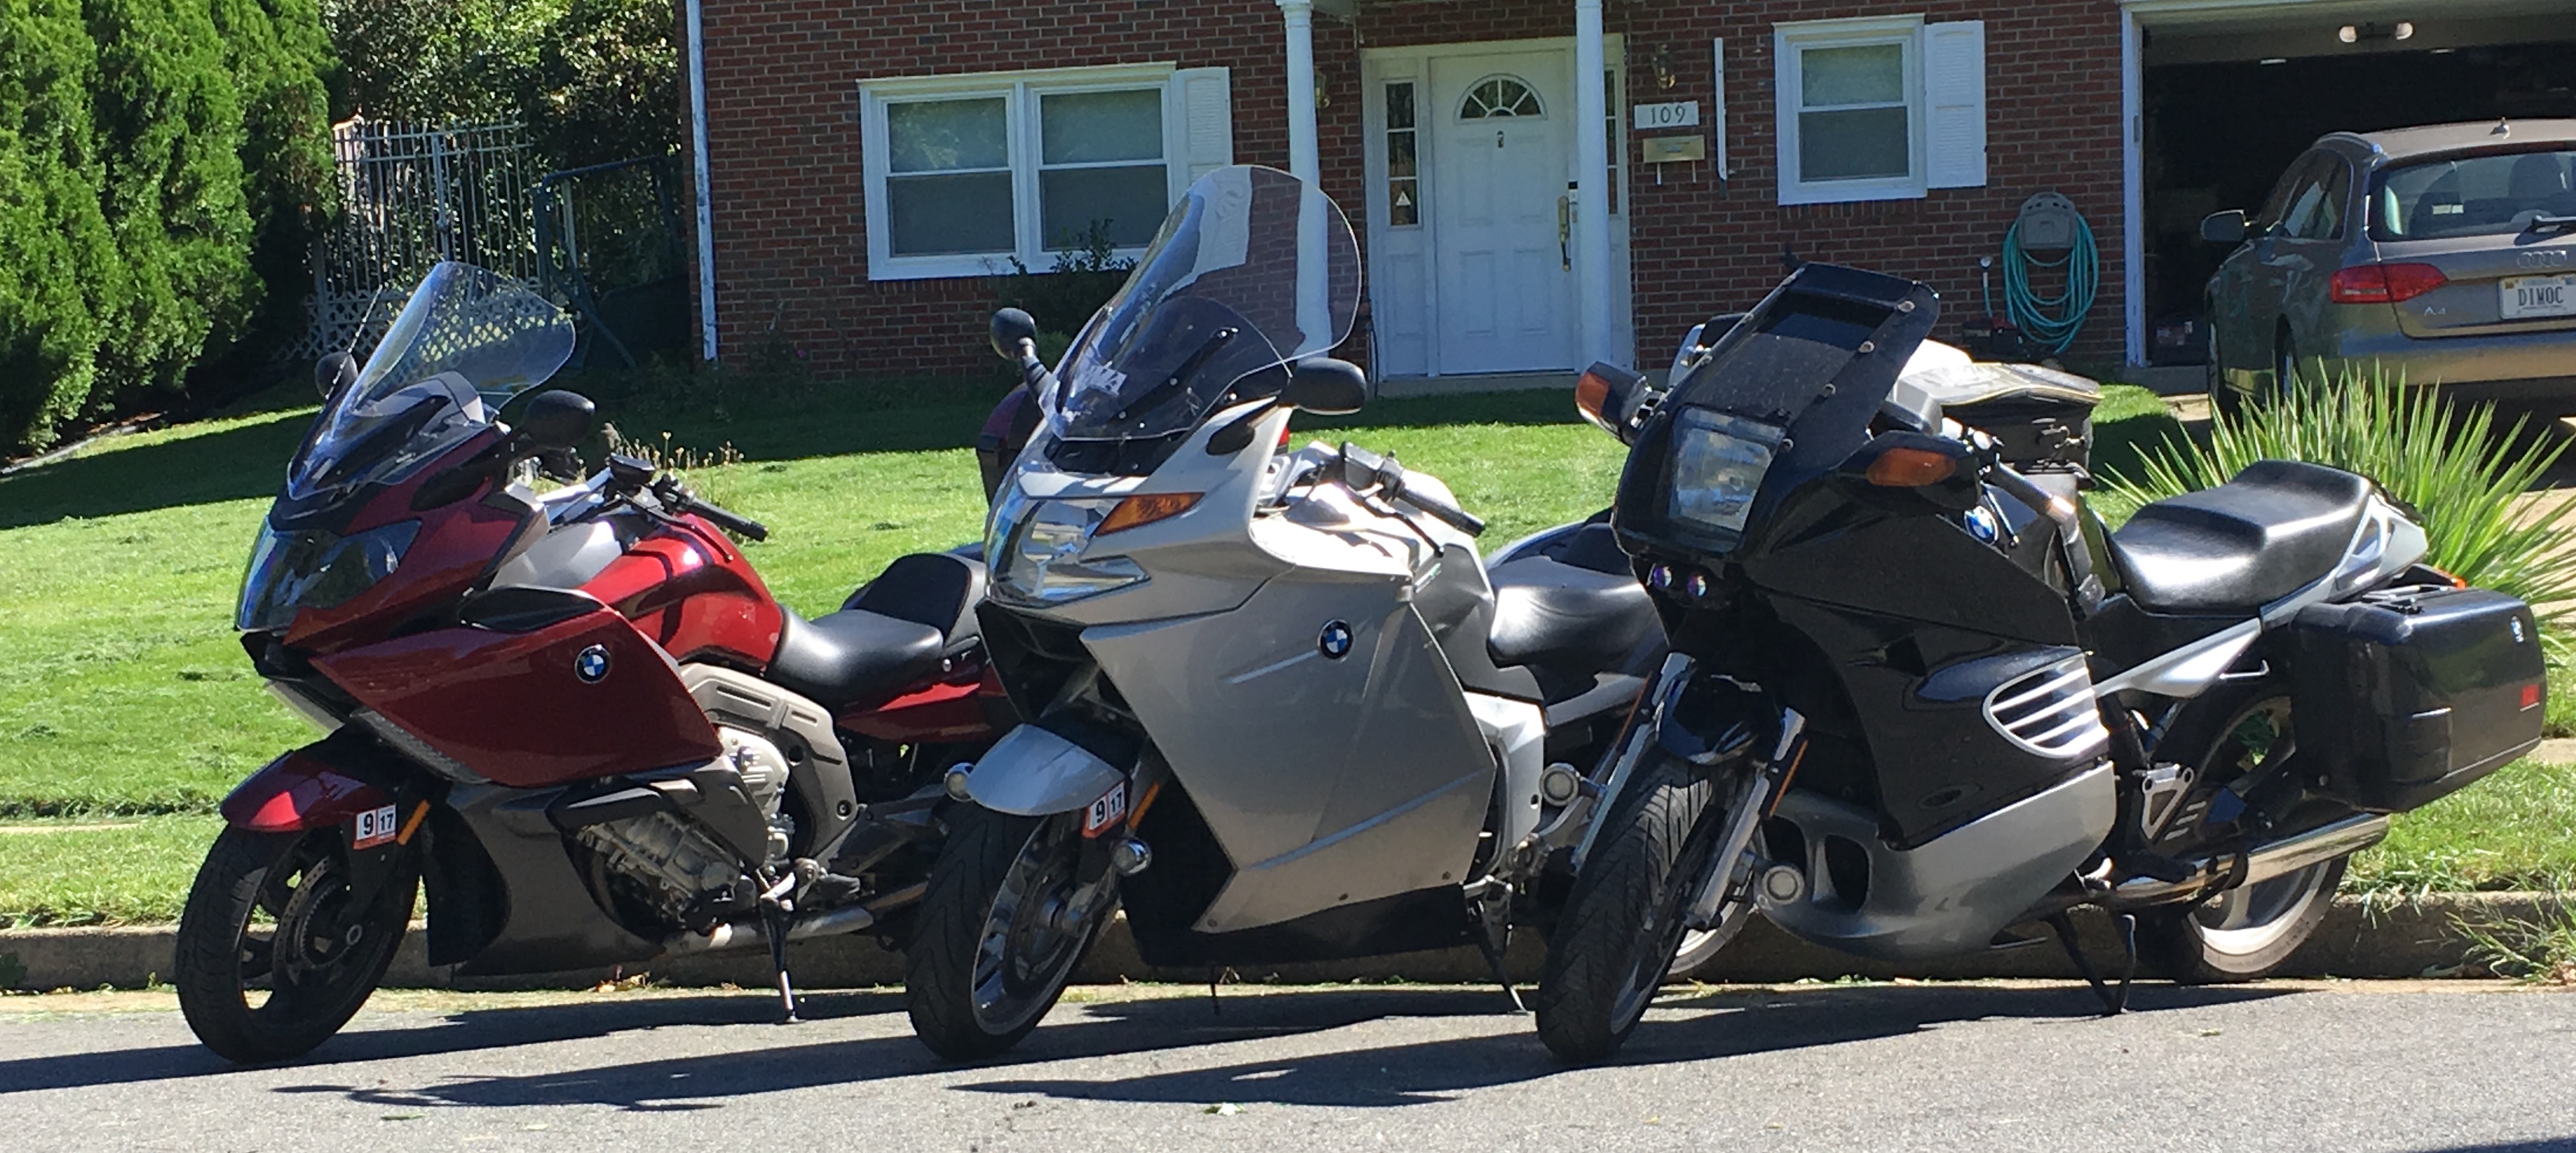 My stable of BMW motorcycles, minus the '85